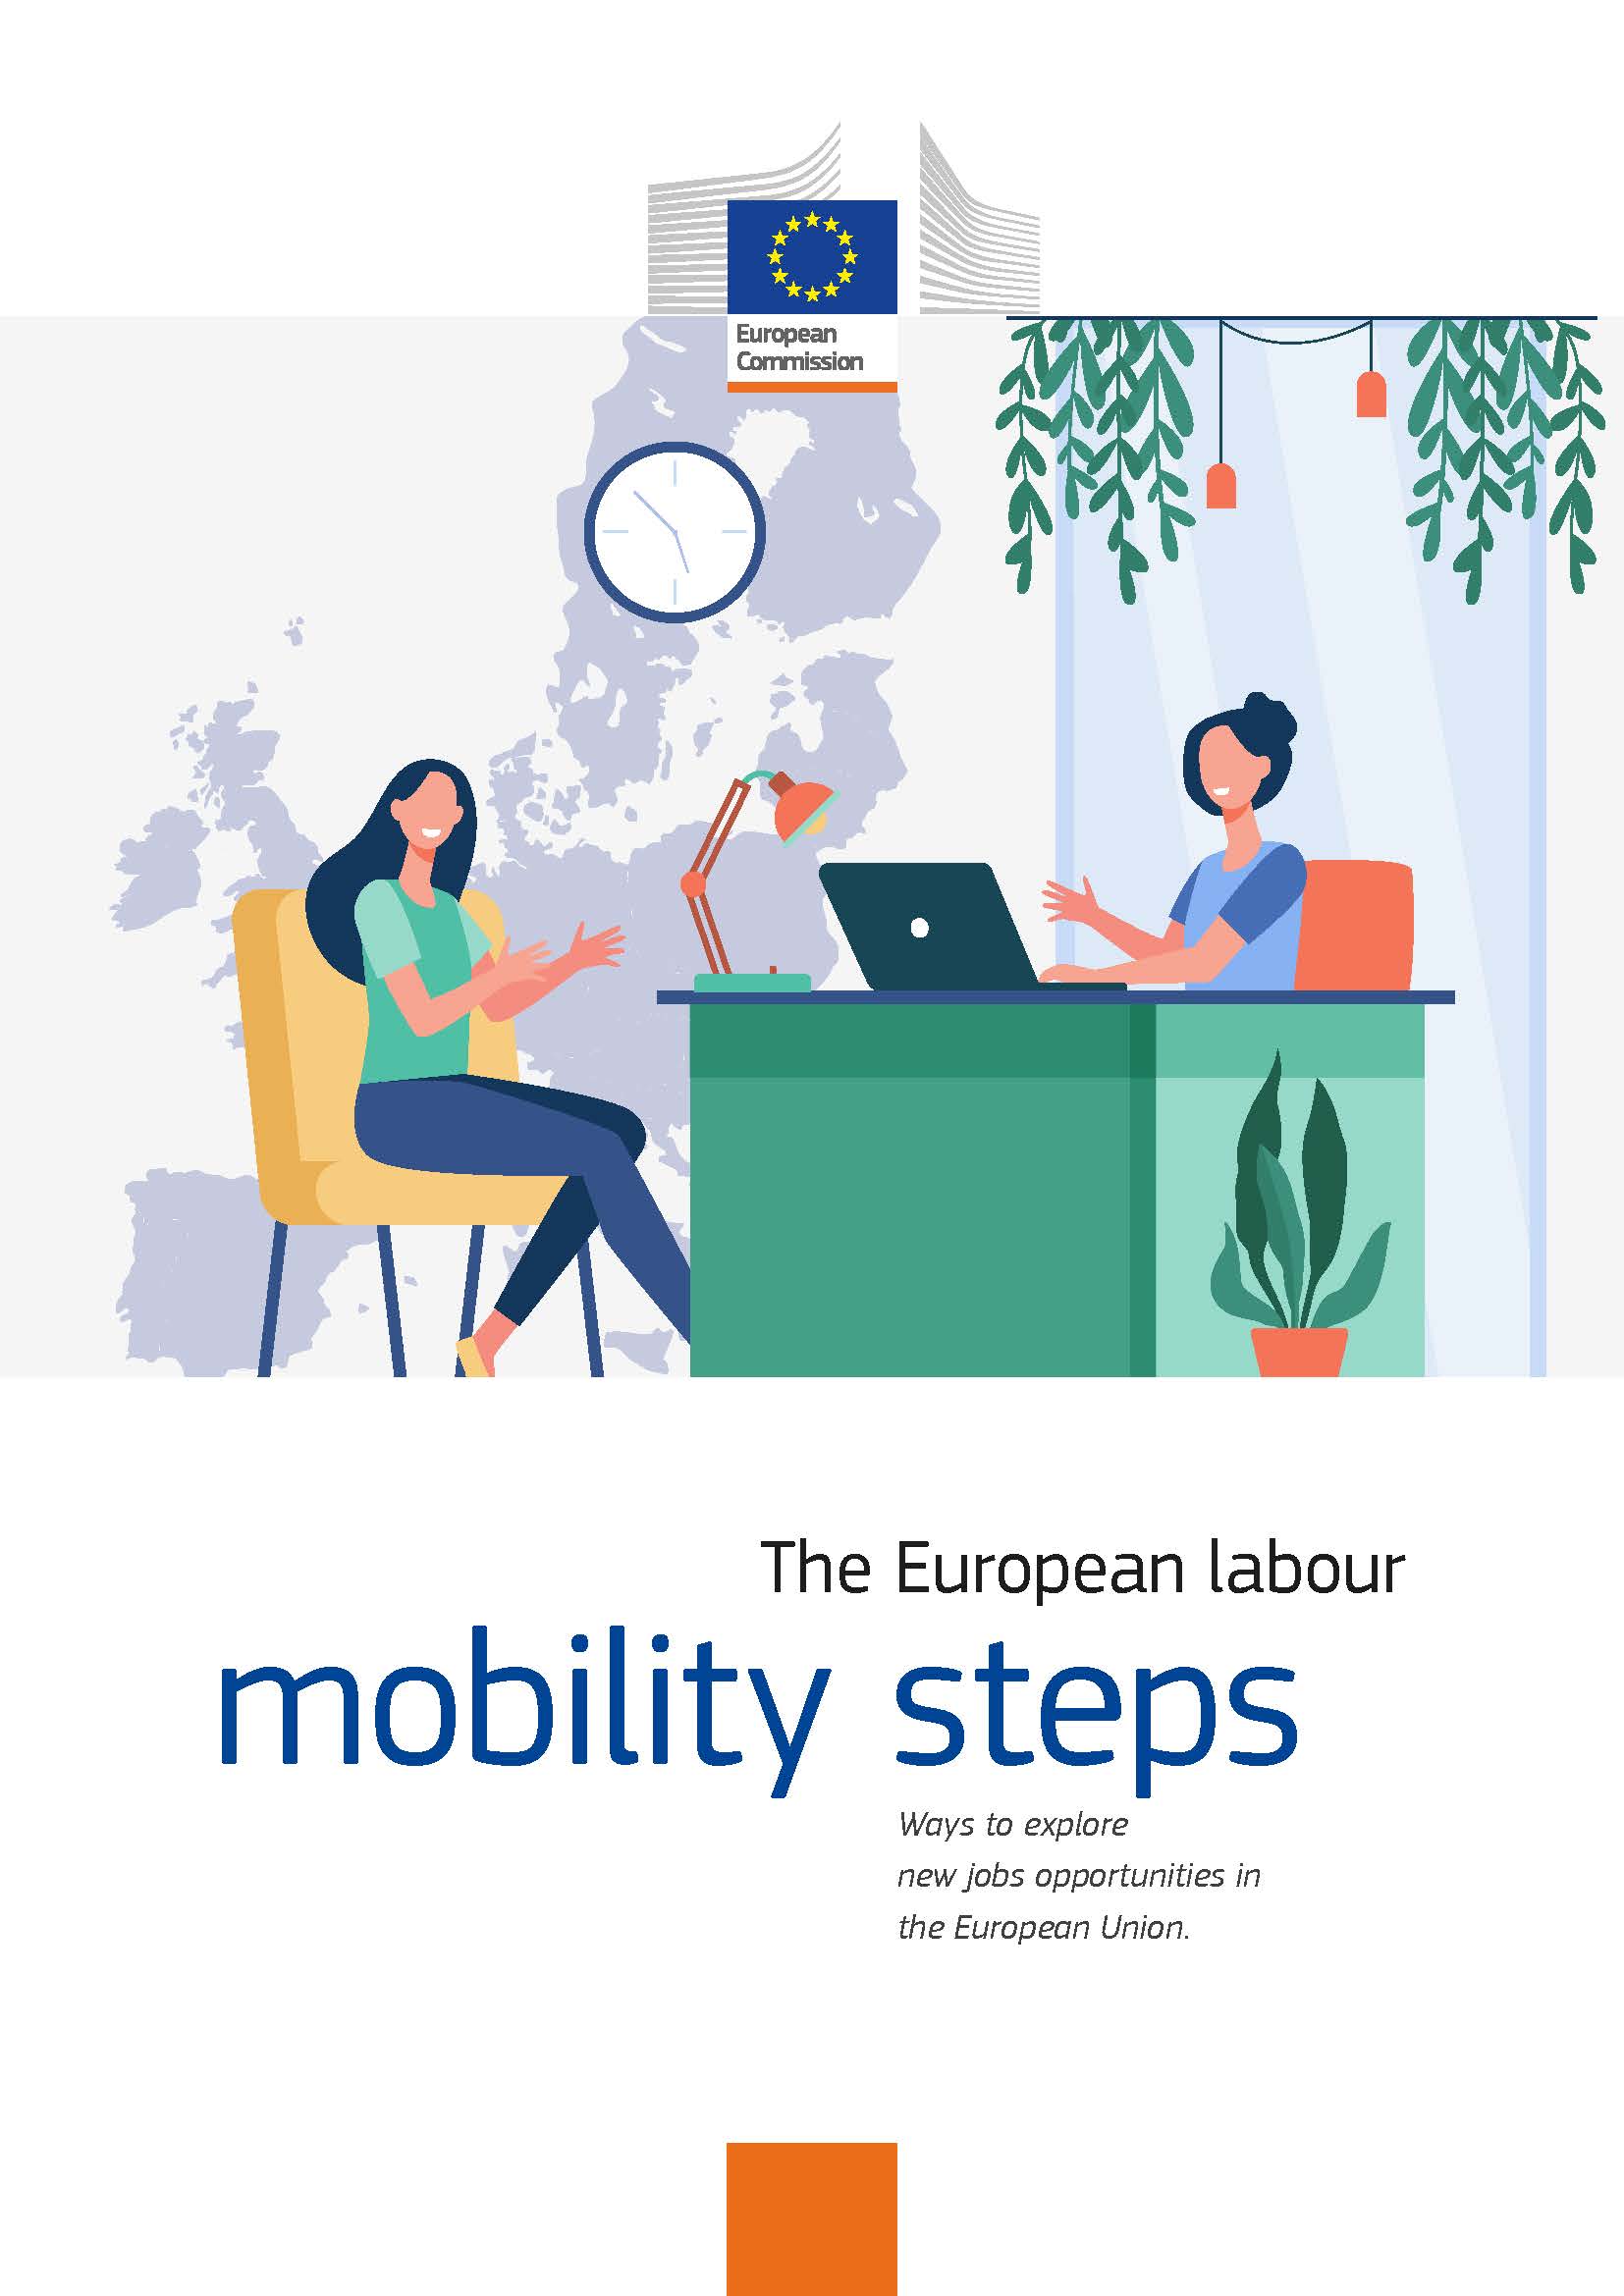 The European labour mobility steps - 
Ways to explore new jobs opportunities in the European Union
